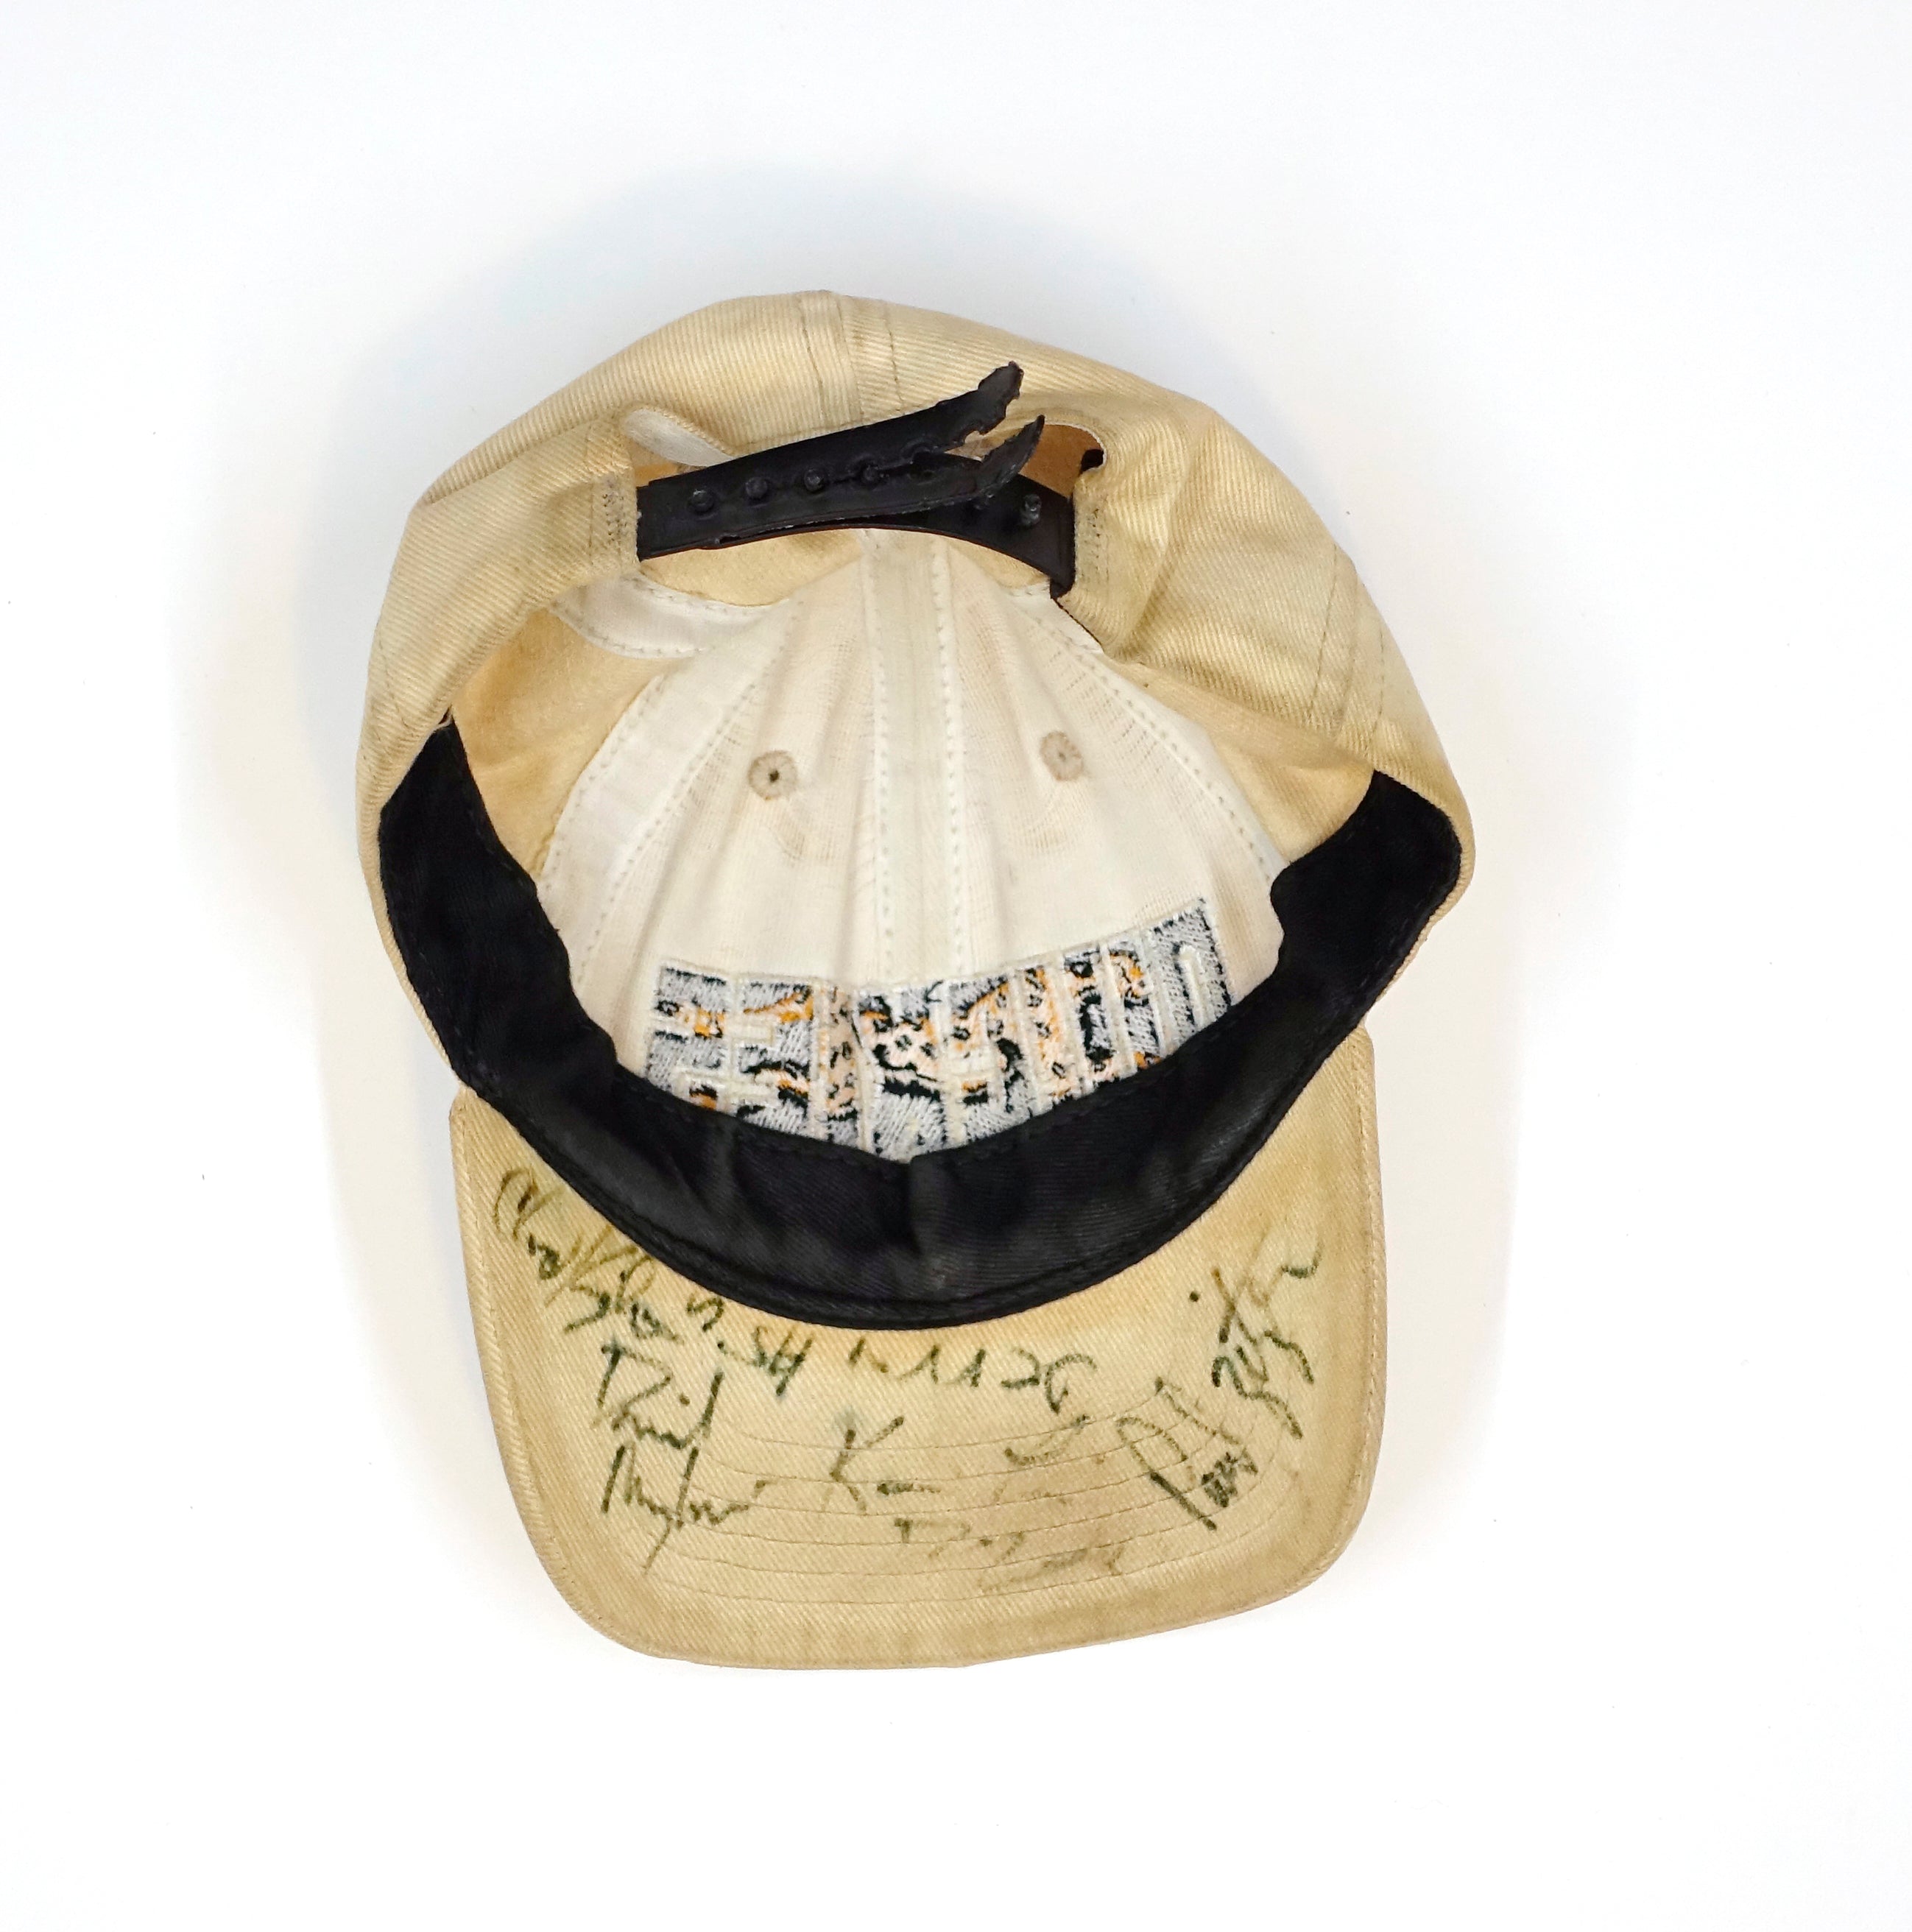 Shorty's - Quickies 90's Hat Size (Autographed by many pros) Large